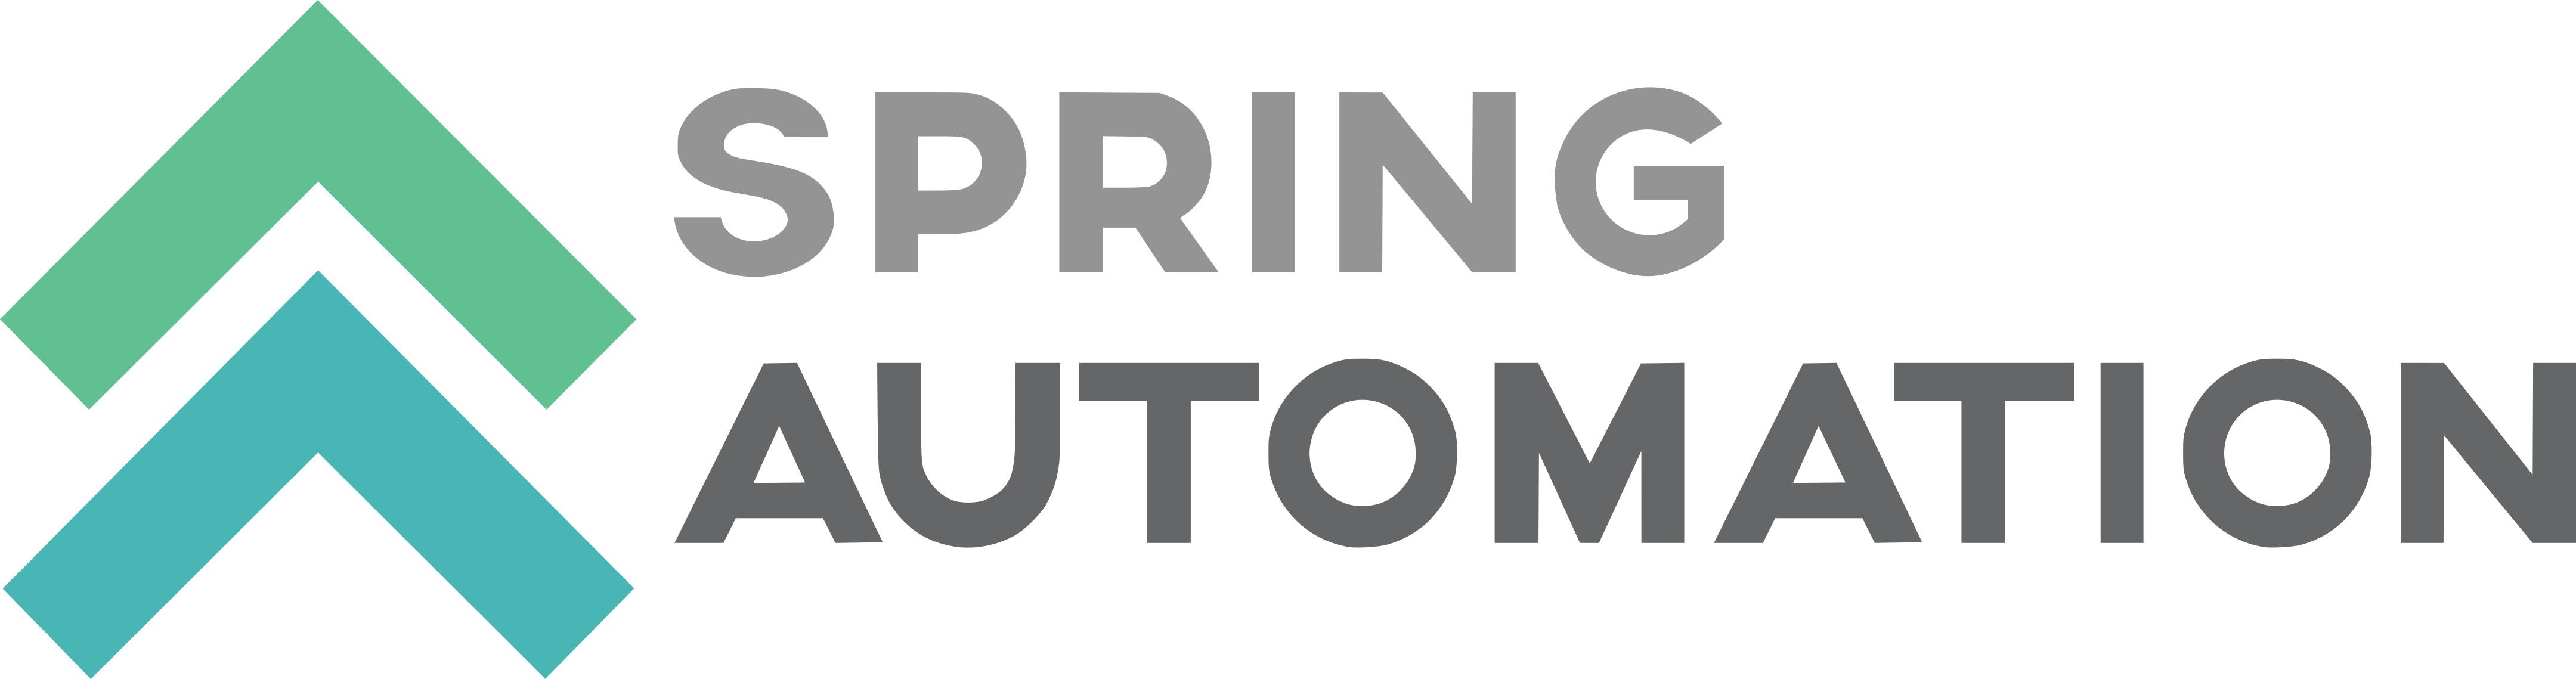 Spring Automation Blog